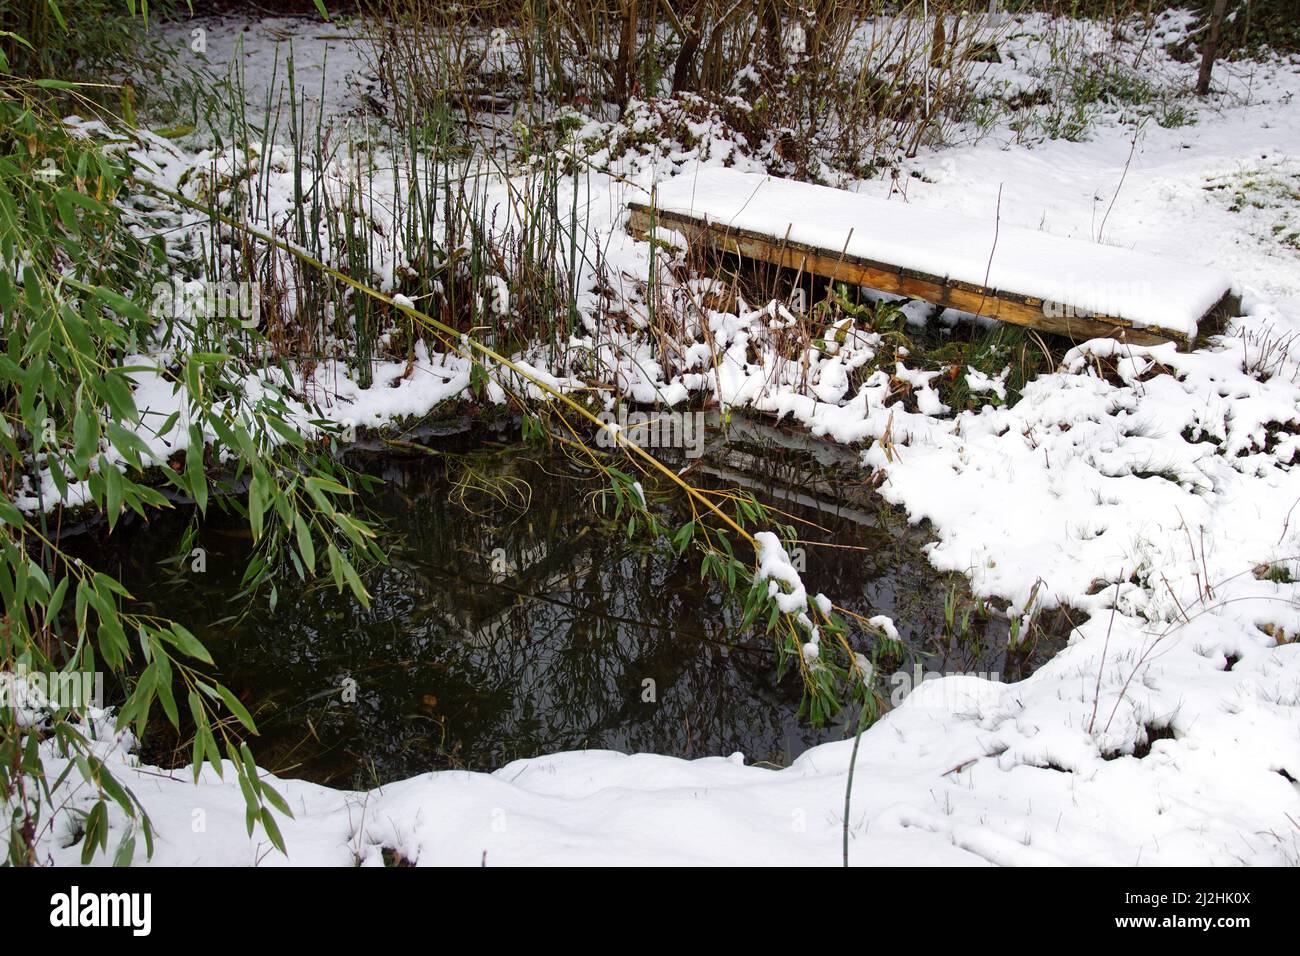 Bamboo in the snow at a pond in a Dutch garden. Bamboo stems bent through the snow. Wooden bridge, Small horsetail. Stock Photo